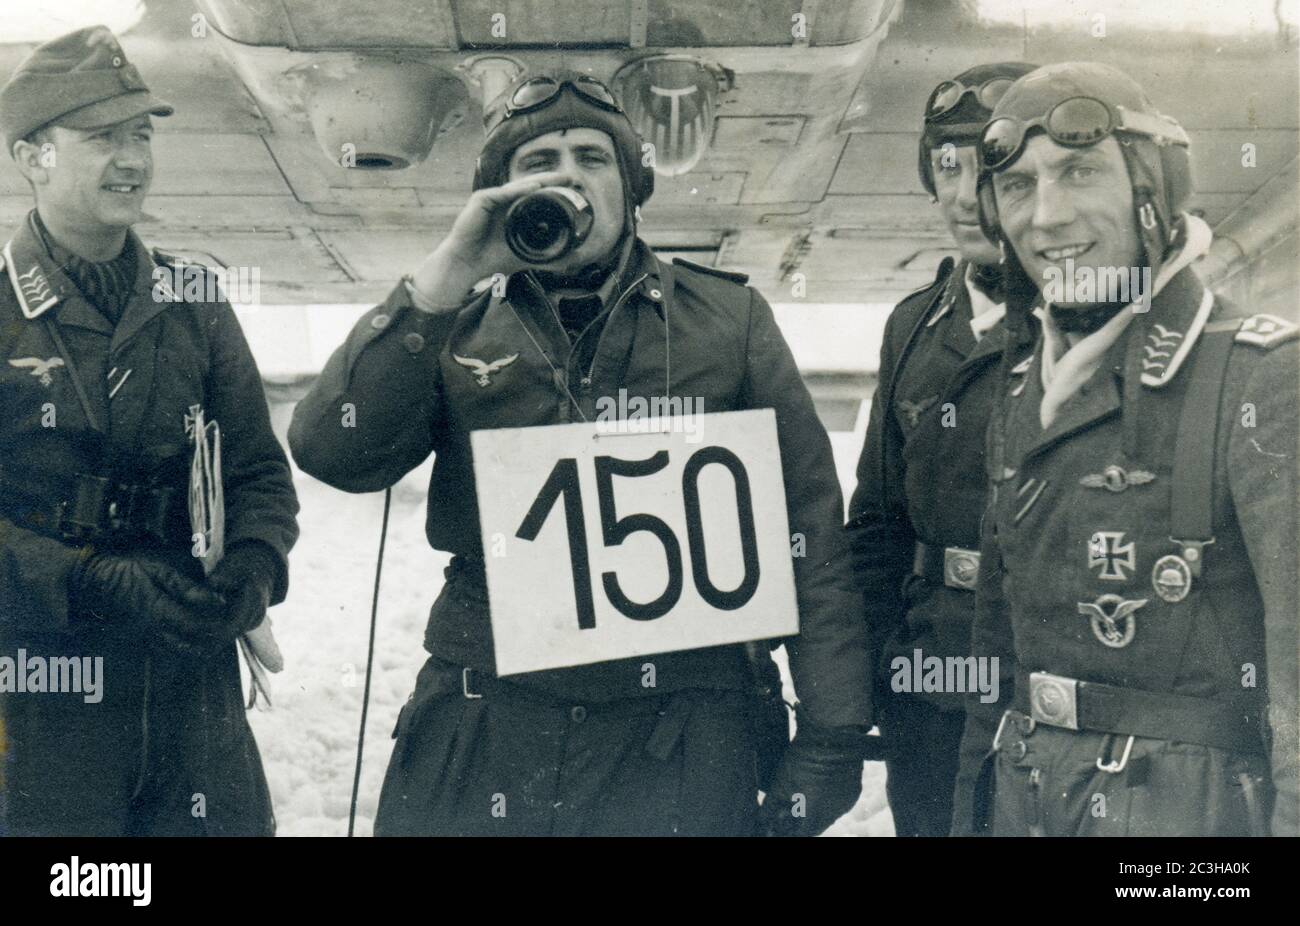 Second World War / WW2 - German reconnaissance aircraft Focke-Wulf Fw 189 pilots celebrating 150 missions, aerial warfare, probably East Front, Russia Stock Photo